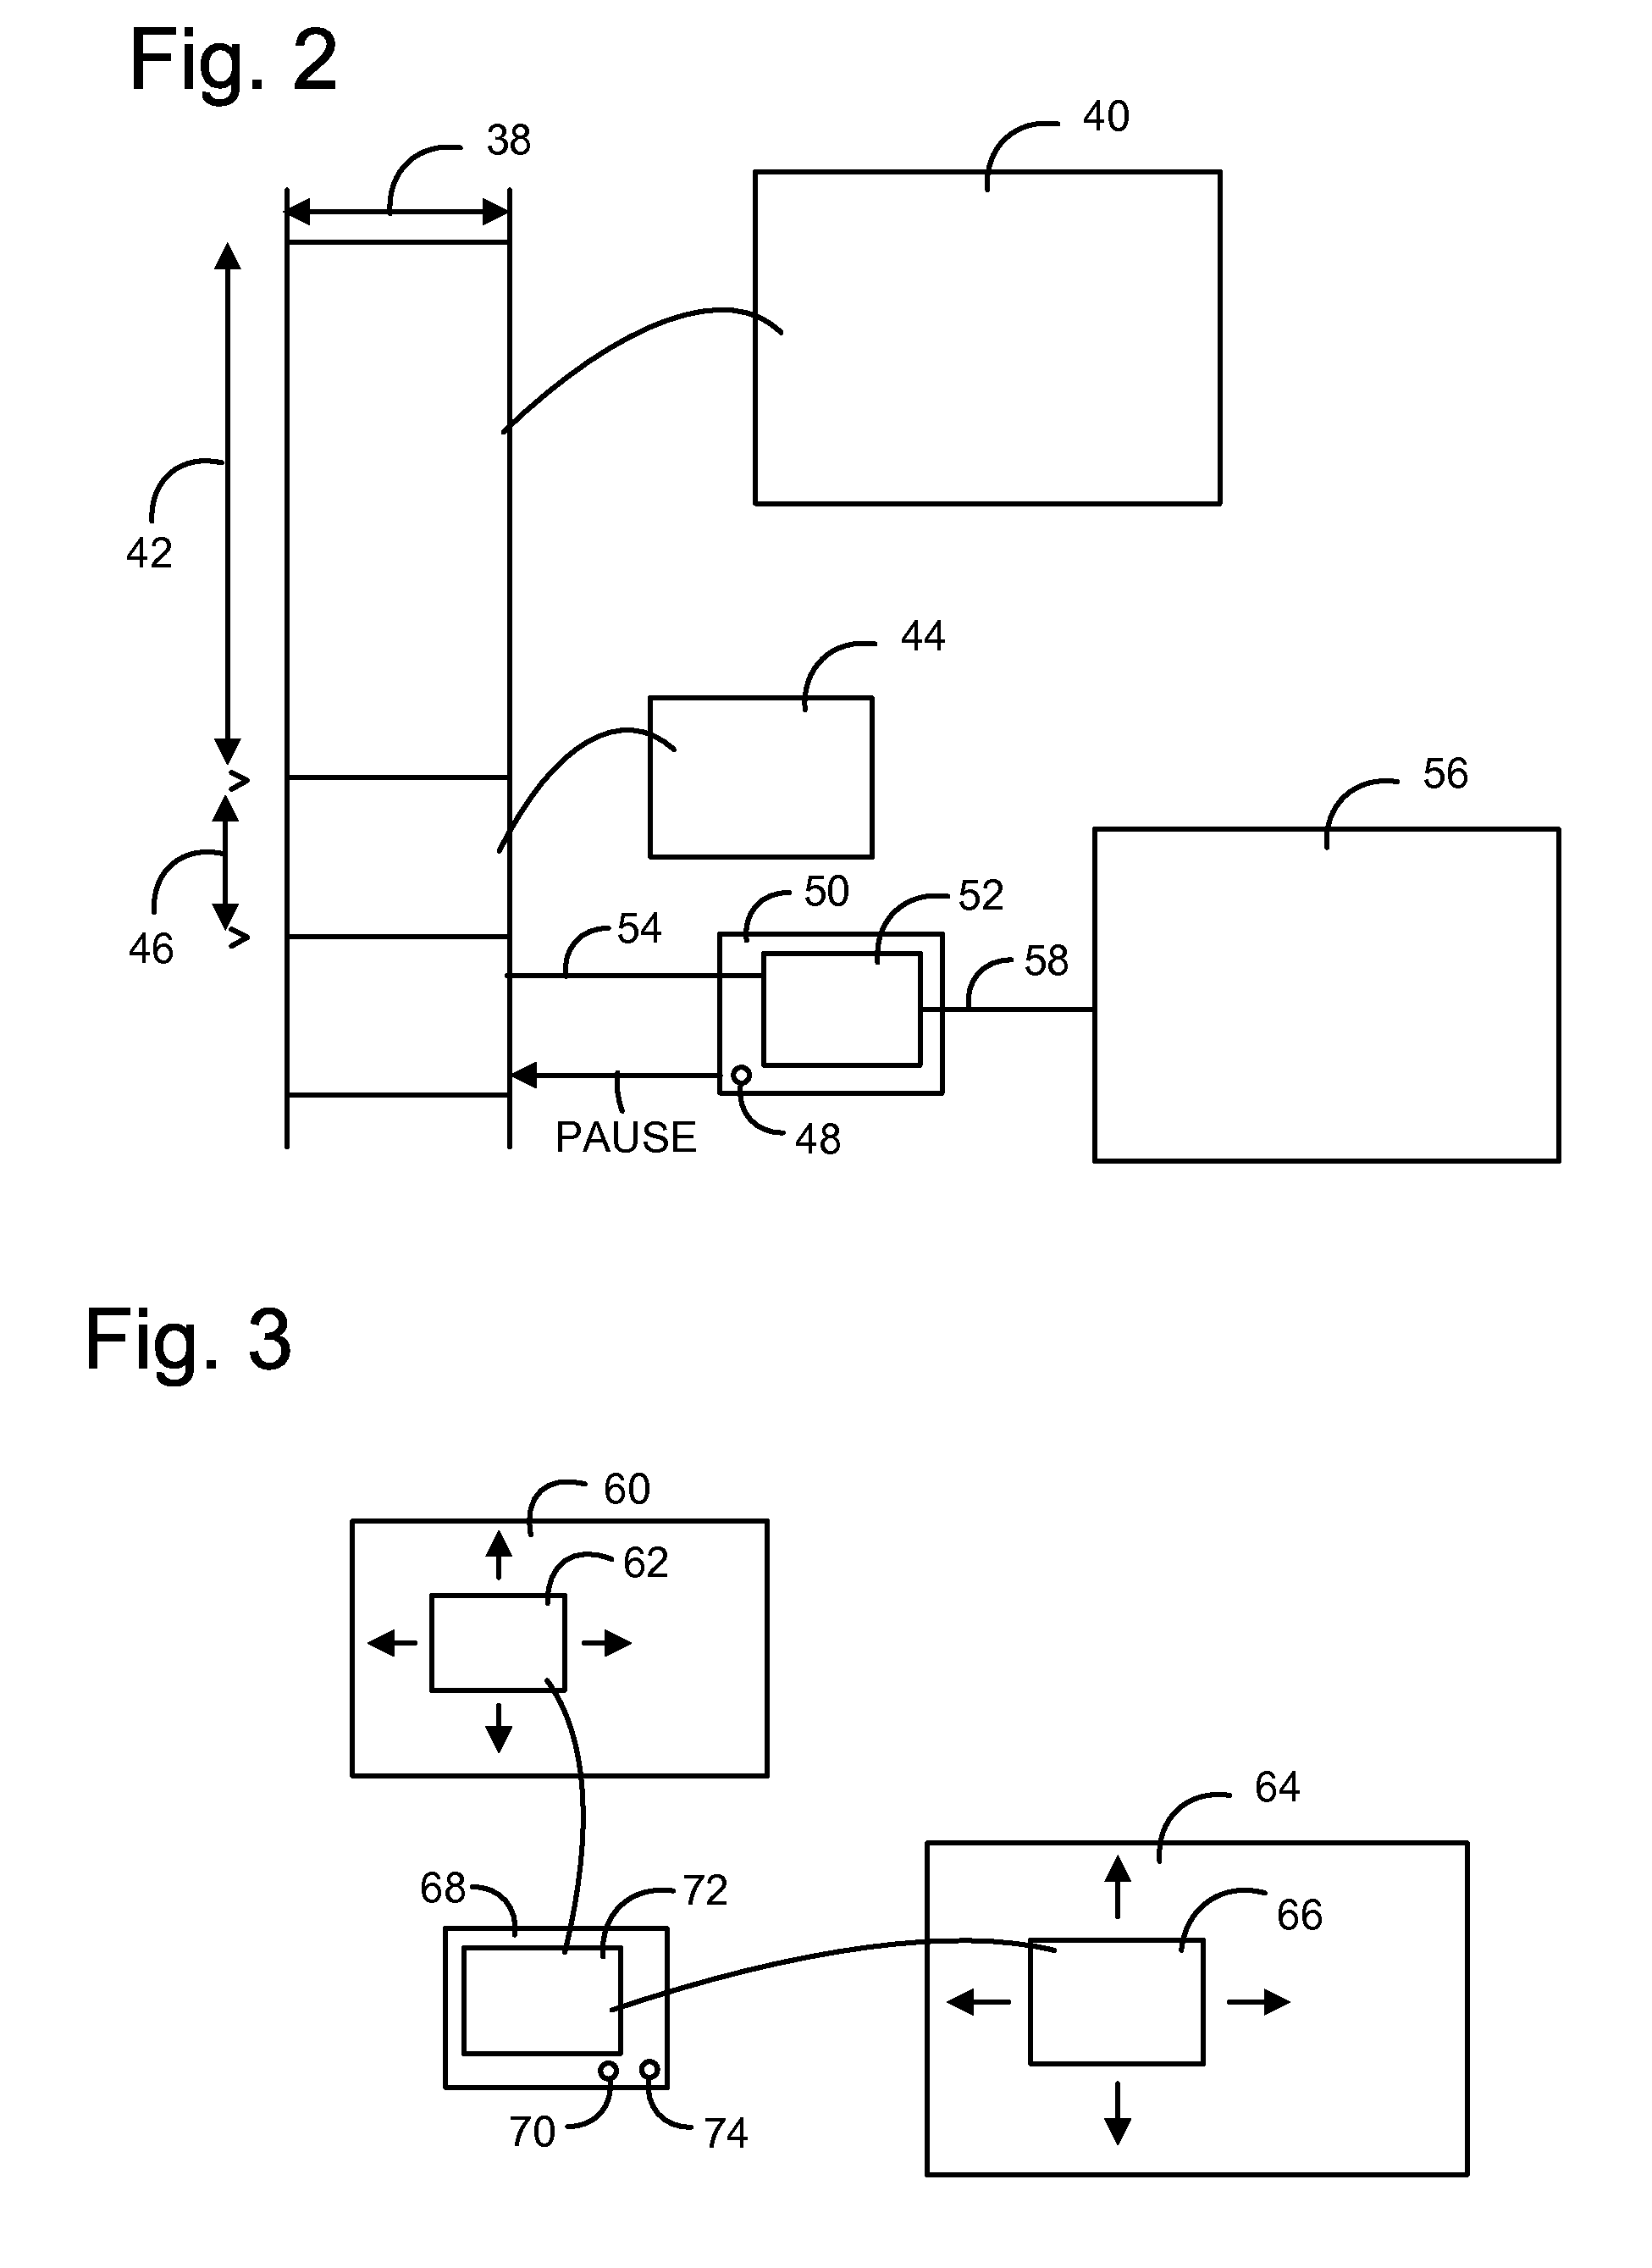 Image Delivery System with Image Quality Varying with Frame Rate